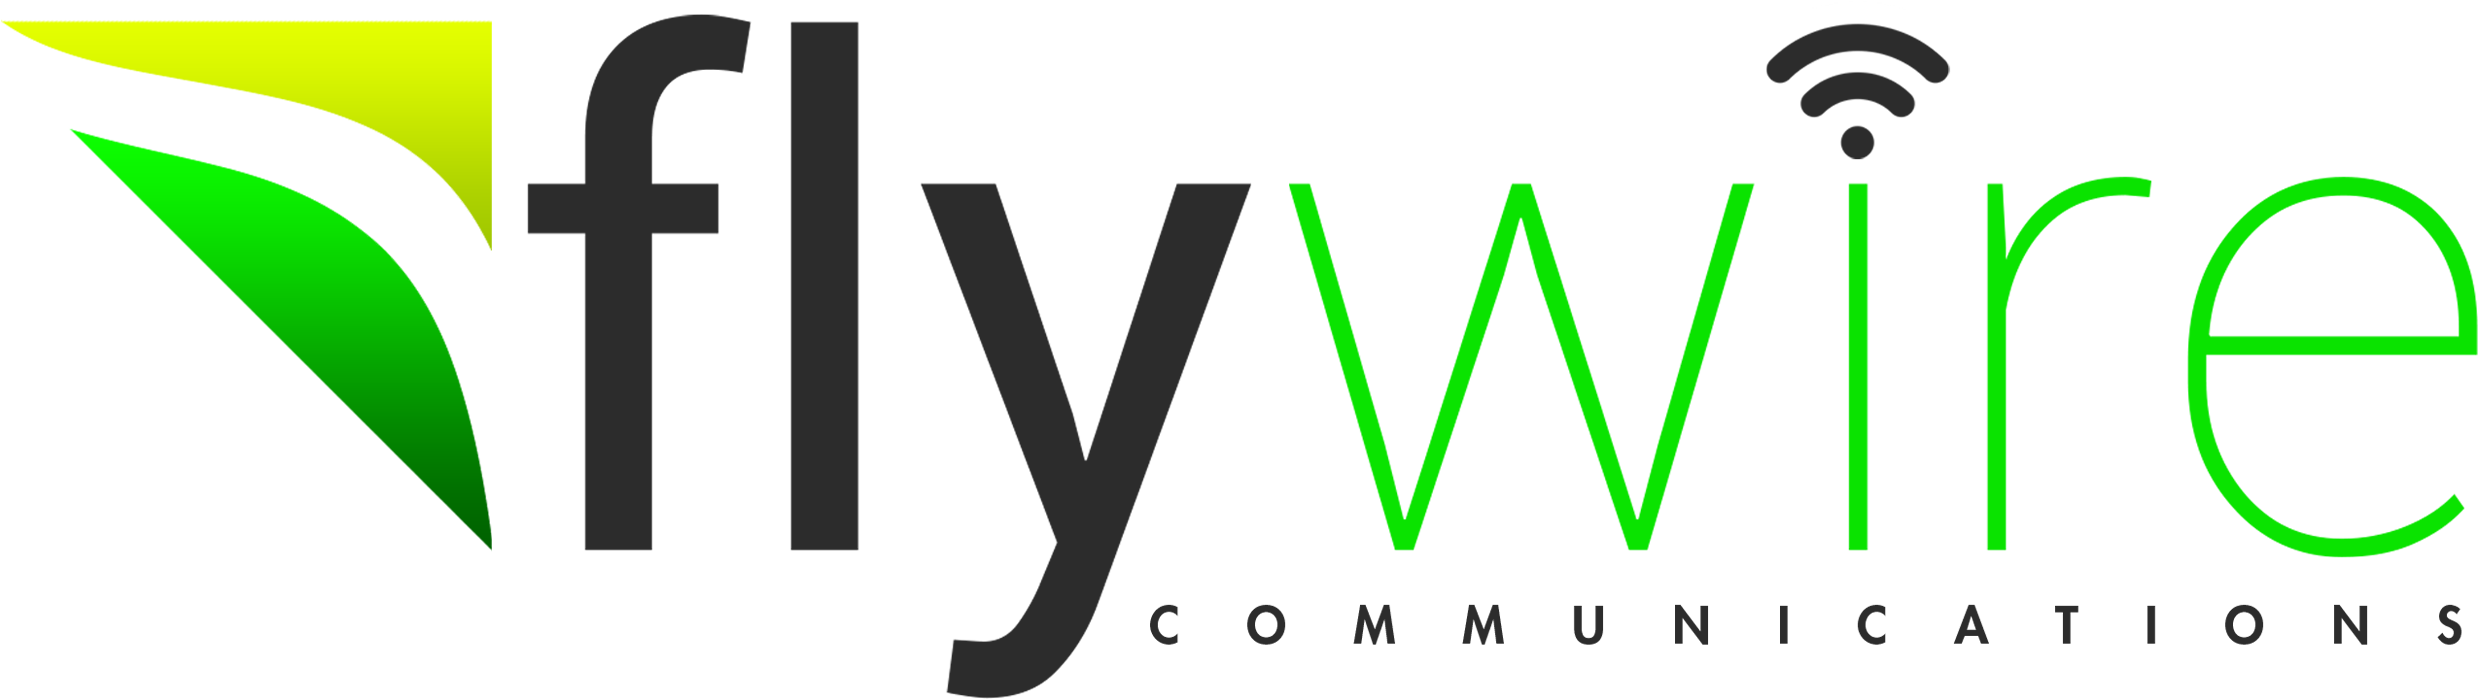 Are You Interested In “flying” With Flywire Communications - Are You Interested In “flying” With Flywire Communications (2548x719)